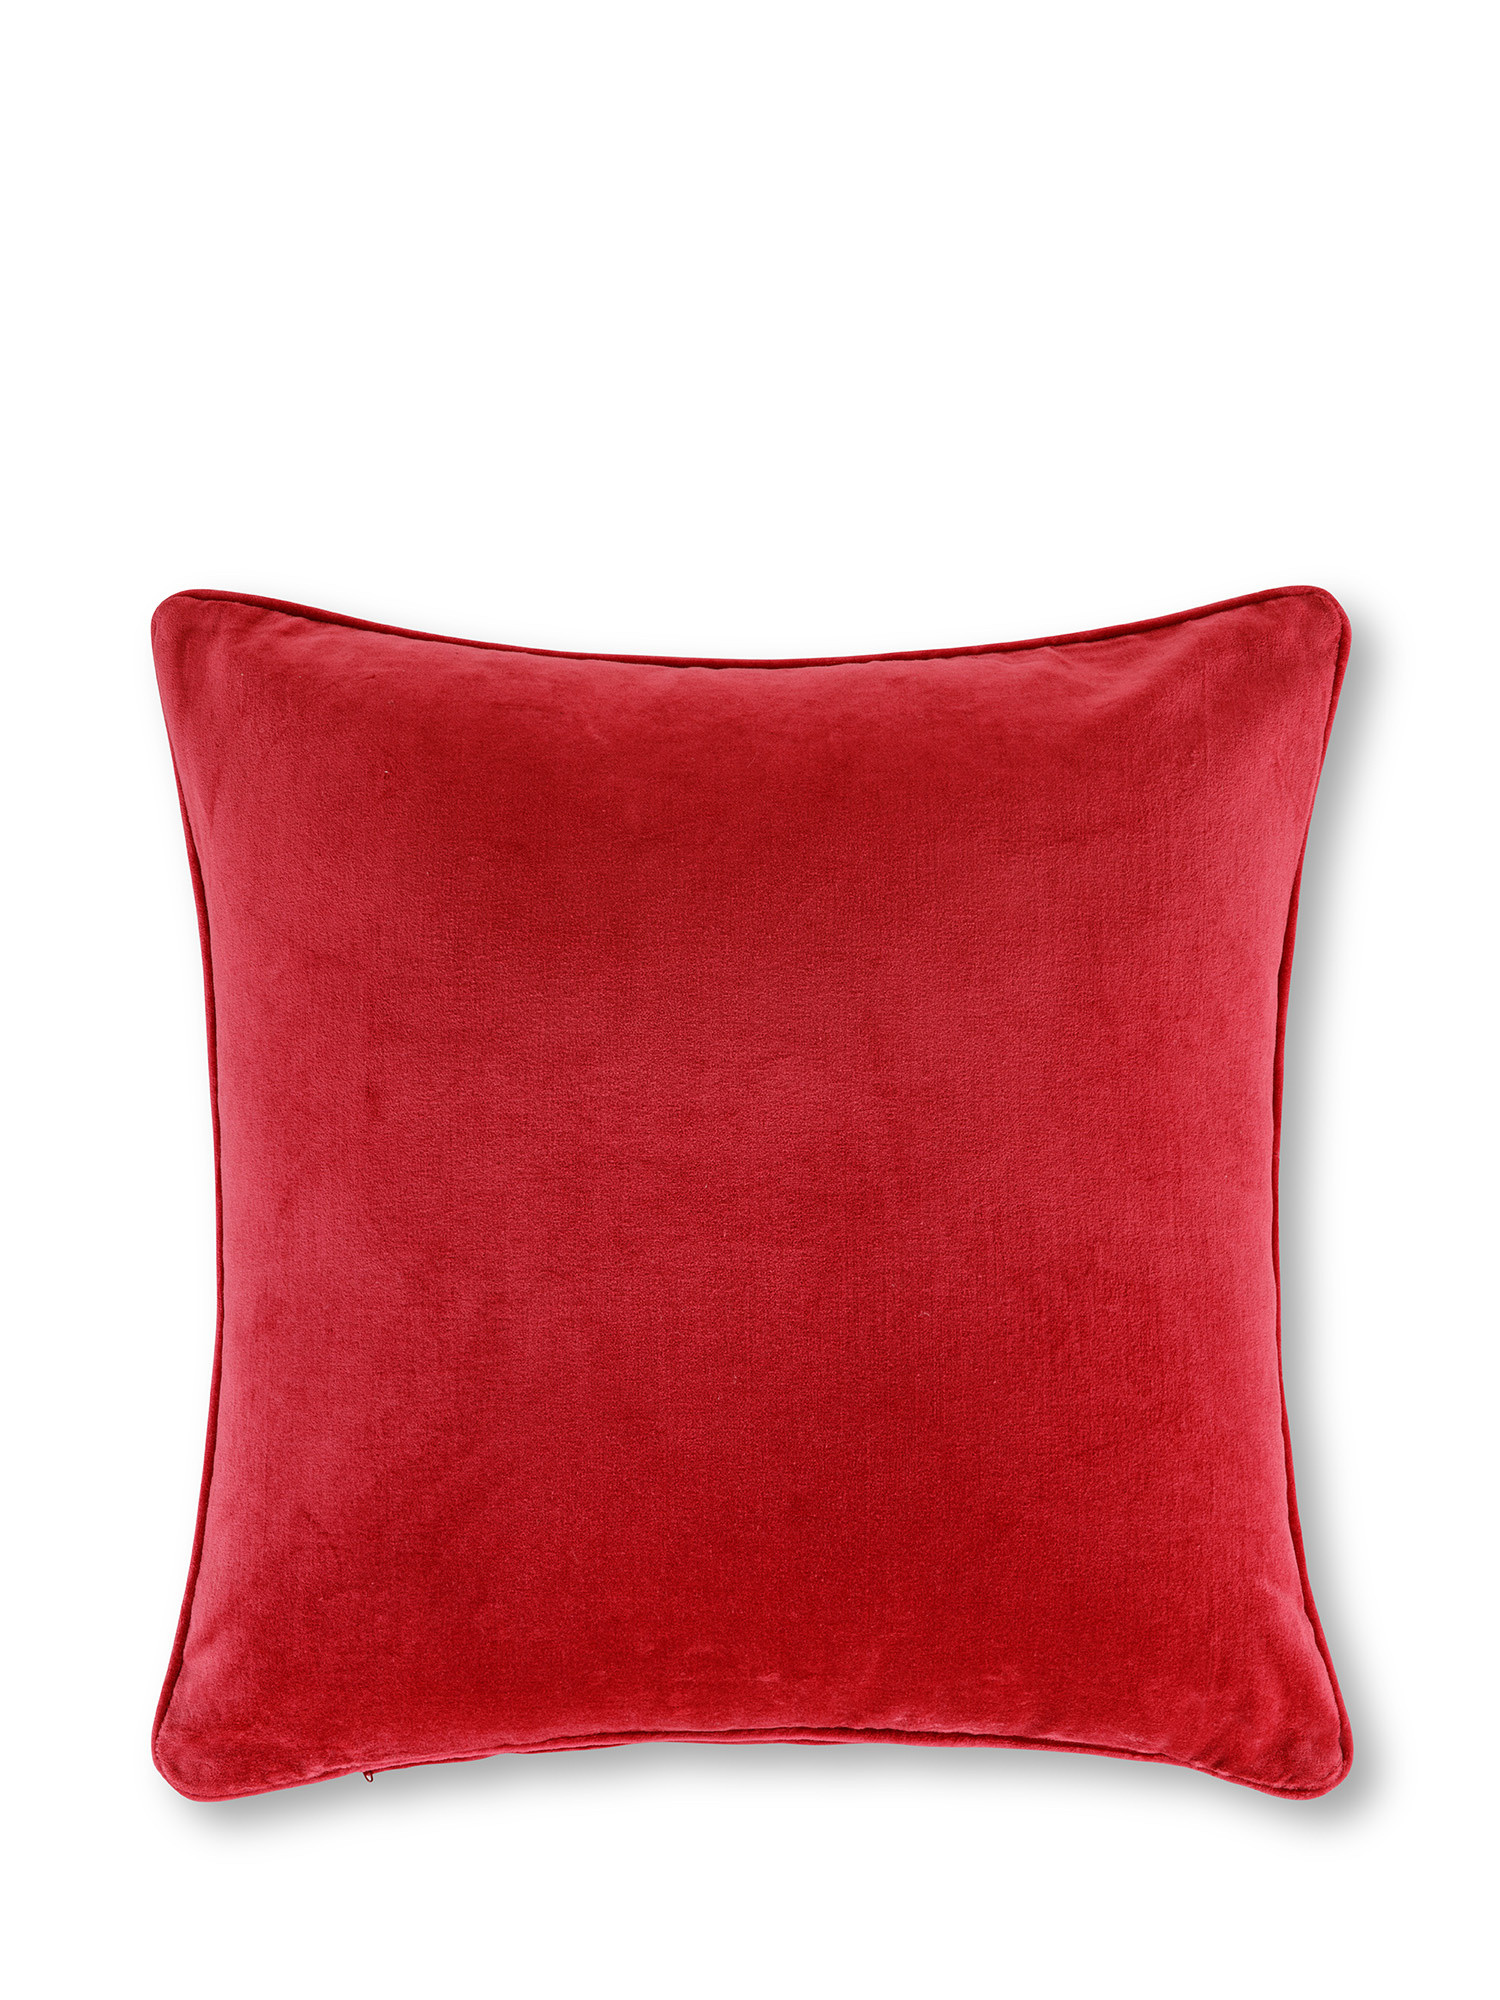 Cuscino in velluto con piping 45x45 cm, Rosso, large image number 0